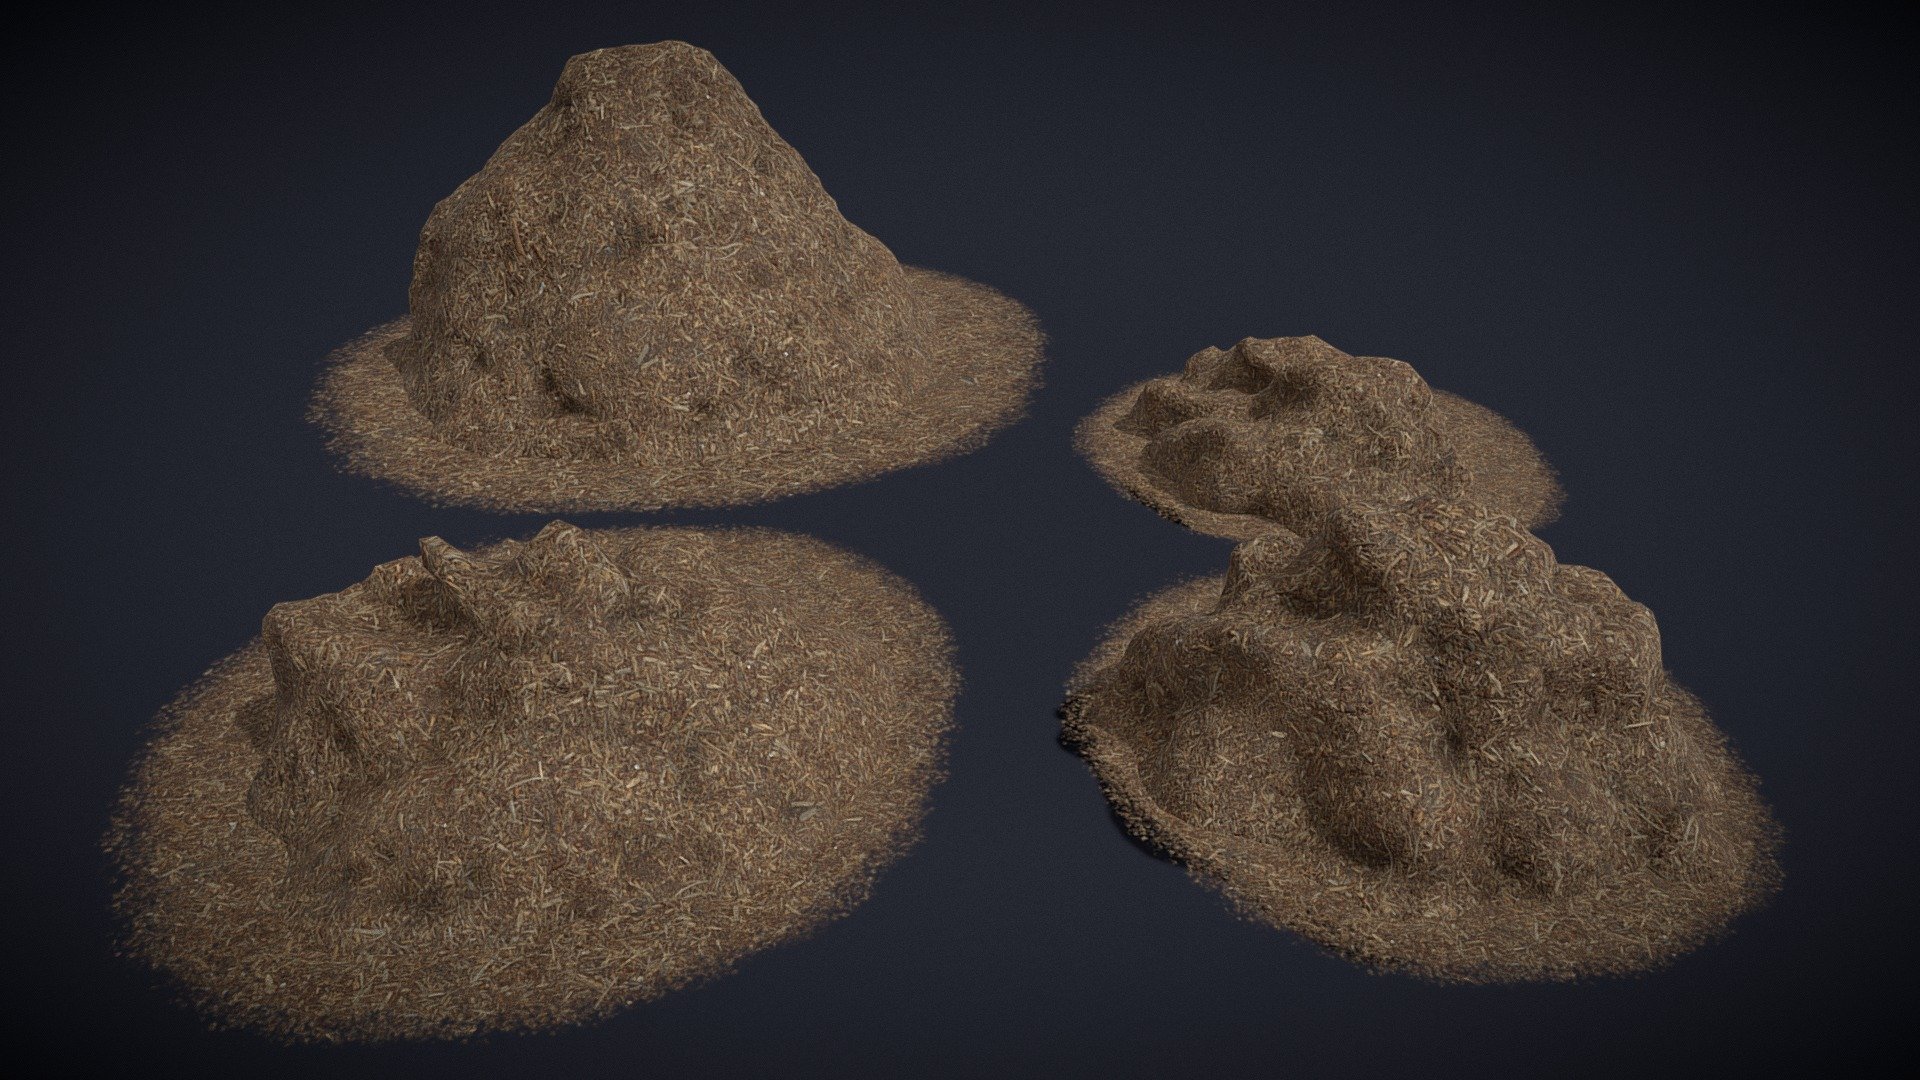 Wood Chip Piles 3D Models- Files Include FBX and OBJ. Includes PBR Texture in 4096 x 4096 3d model